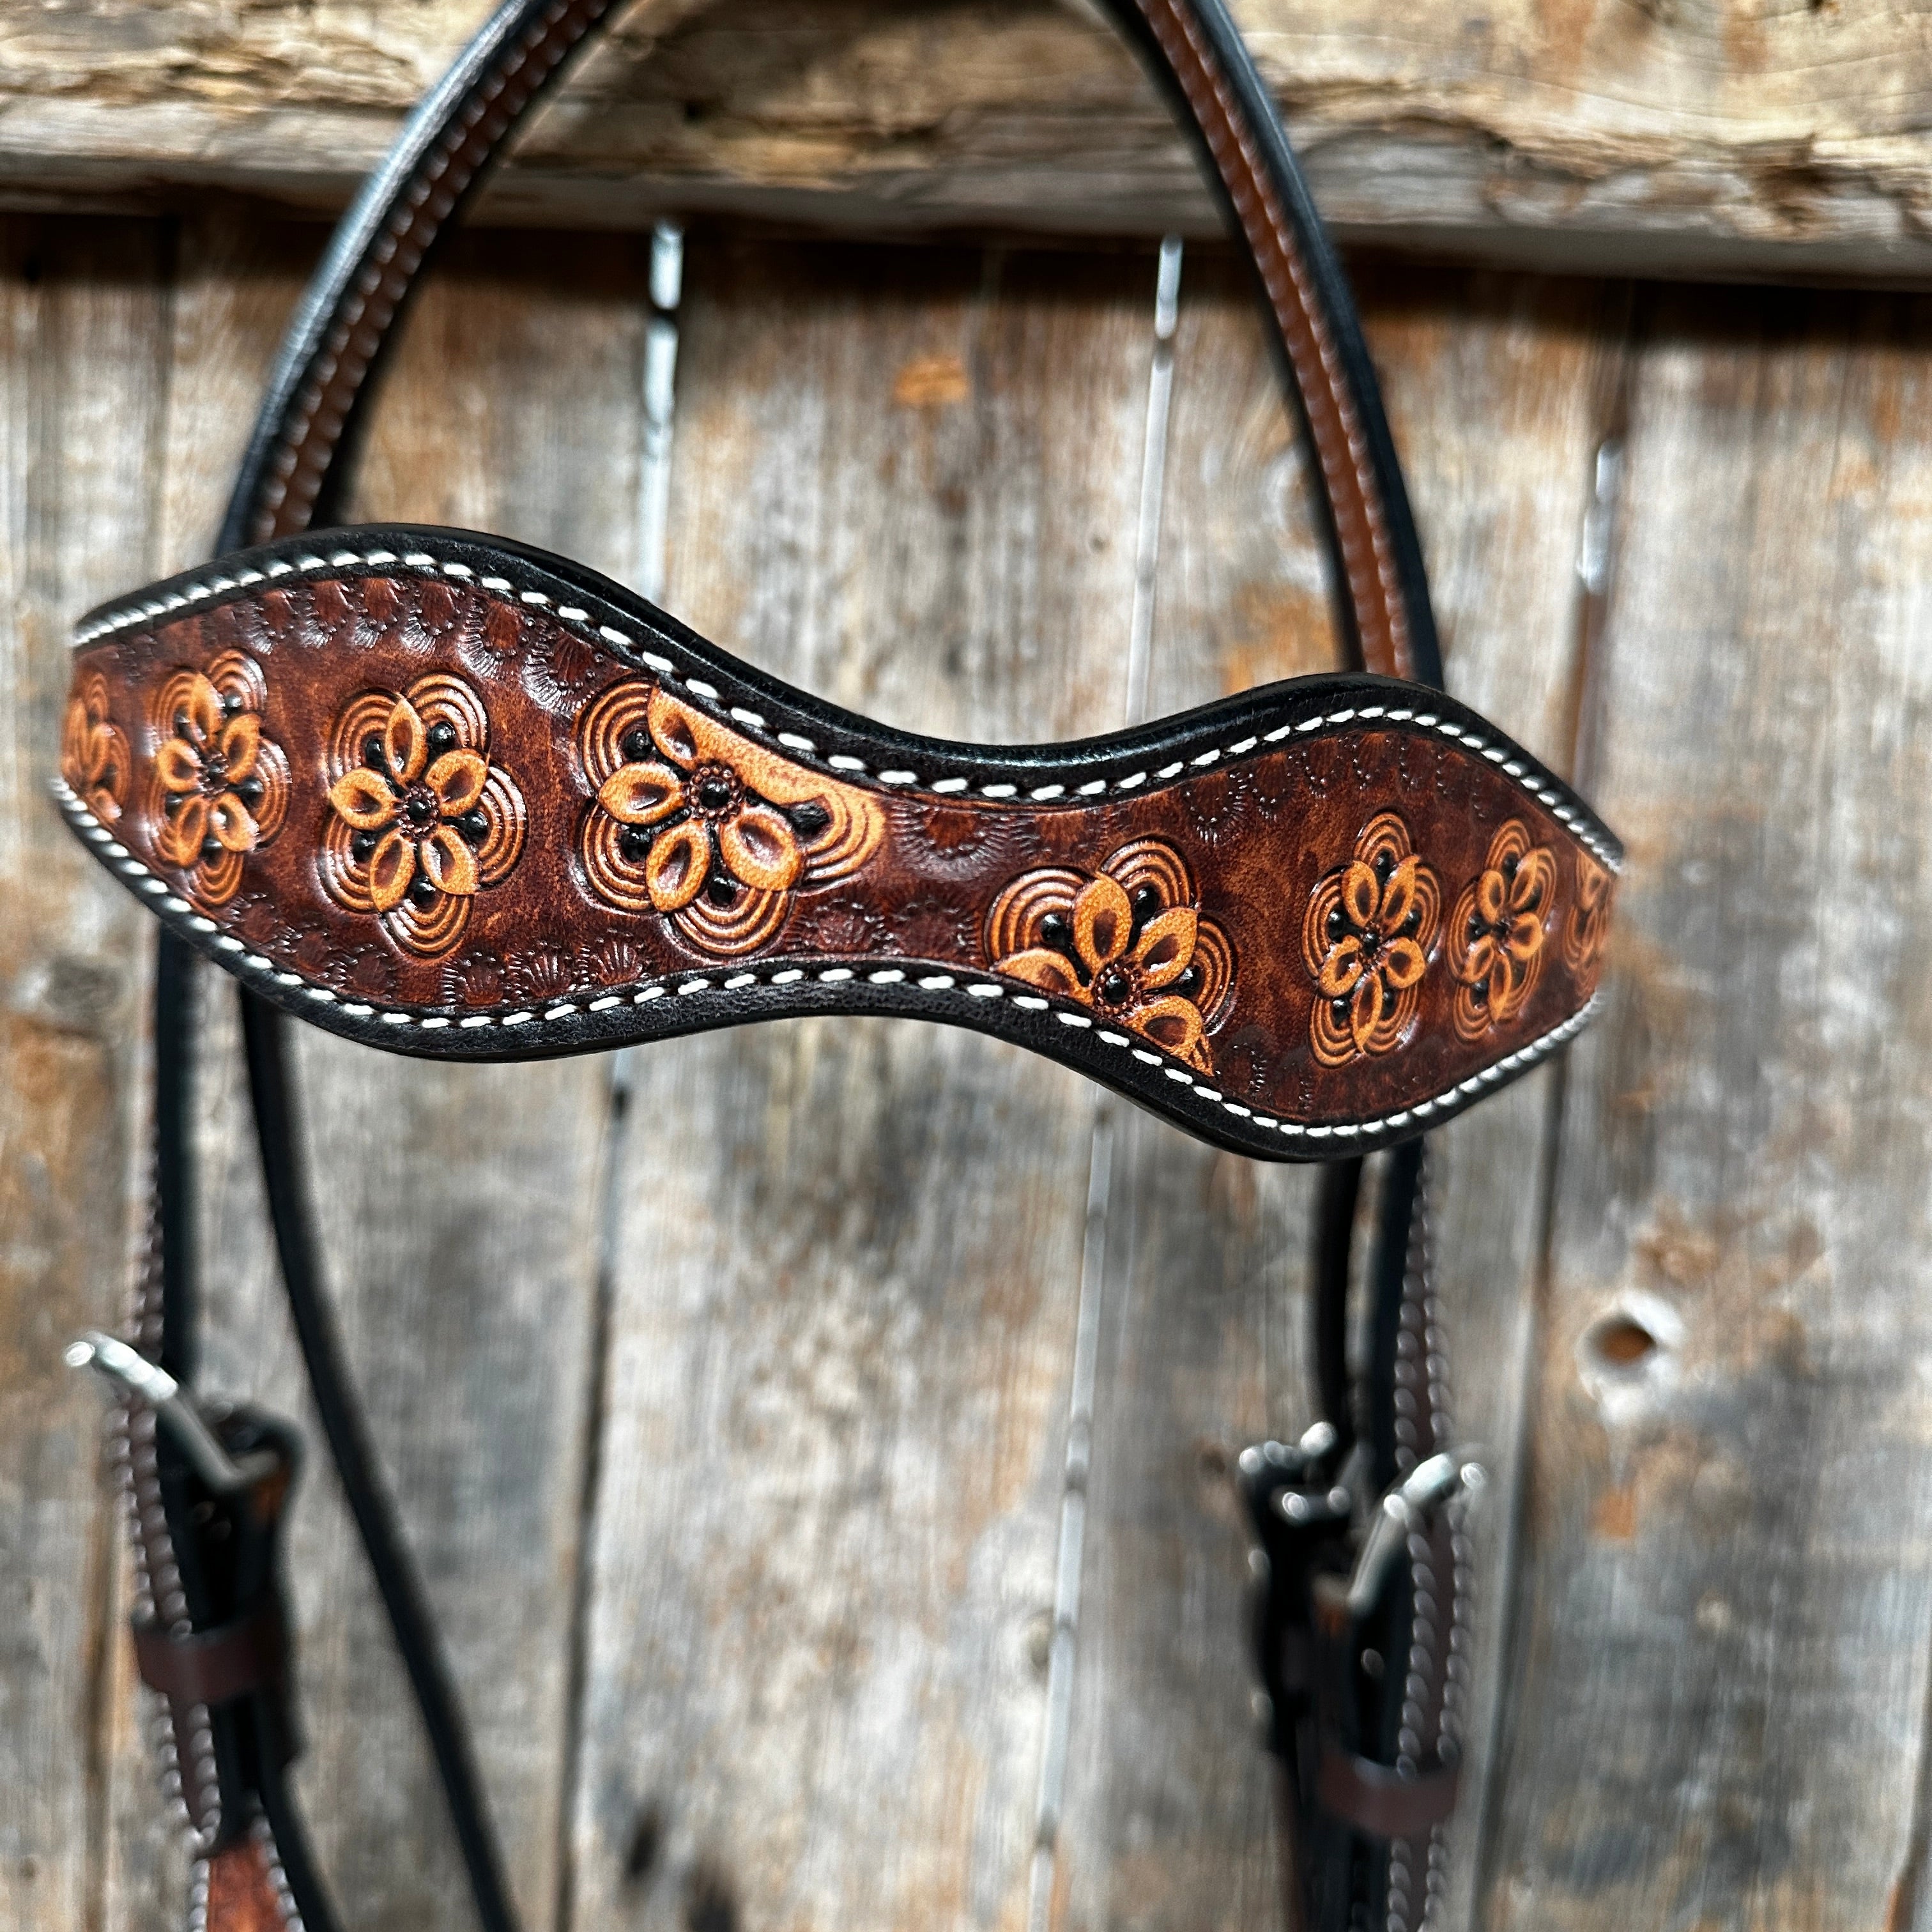 Flower Power Browband/One Ear Breastcollar Tack Sets